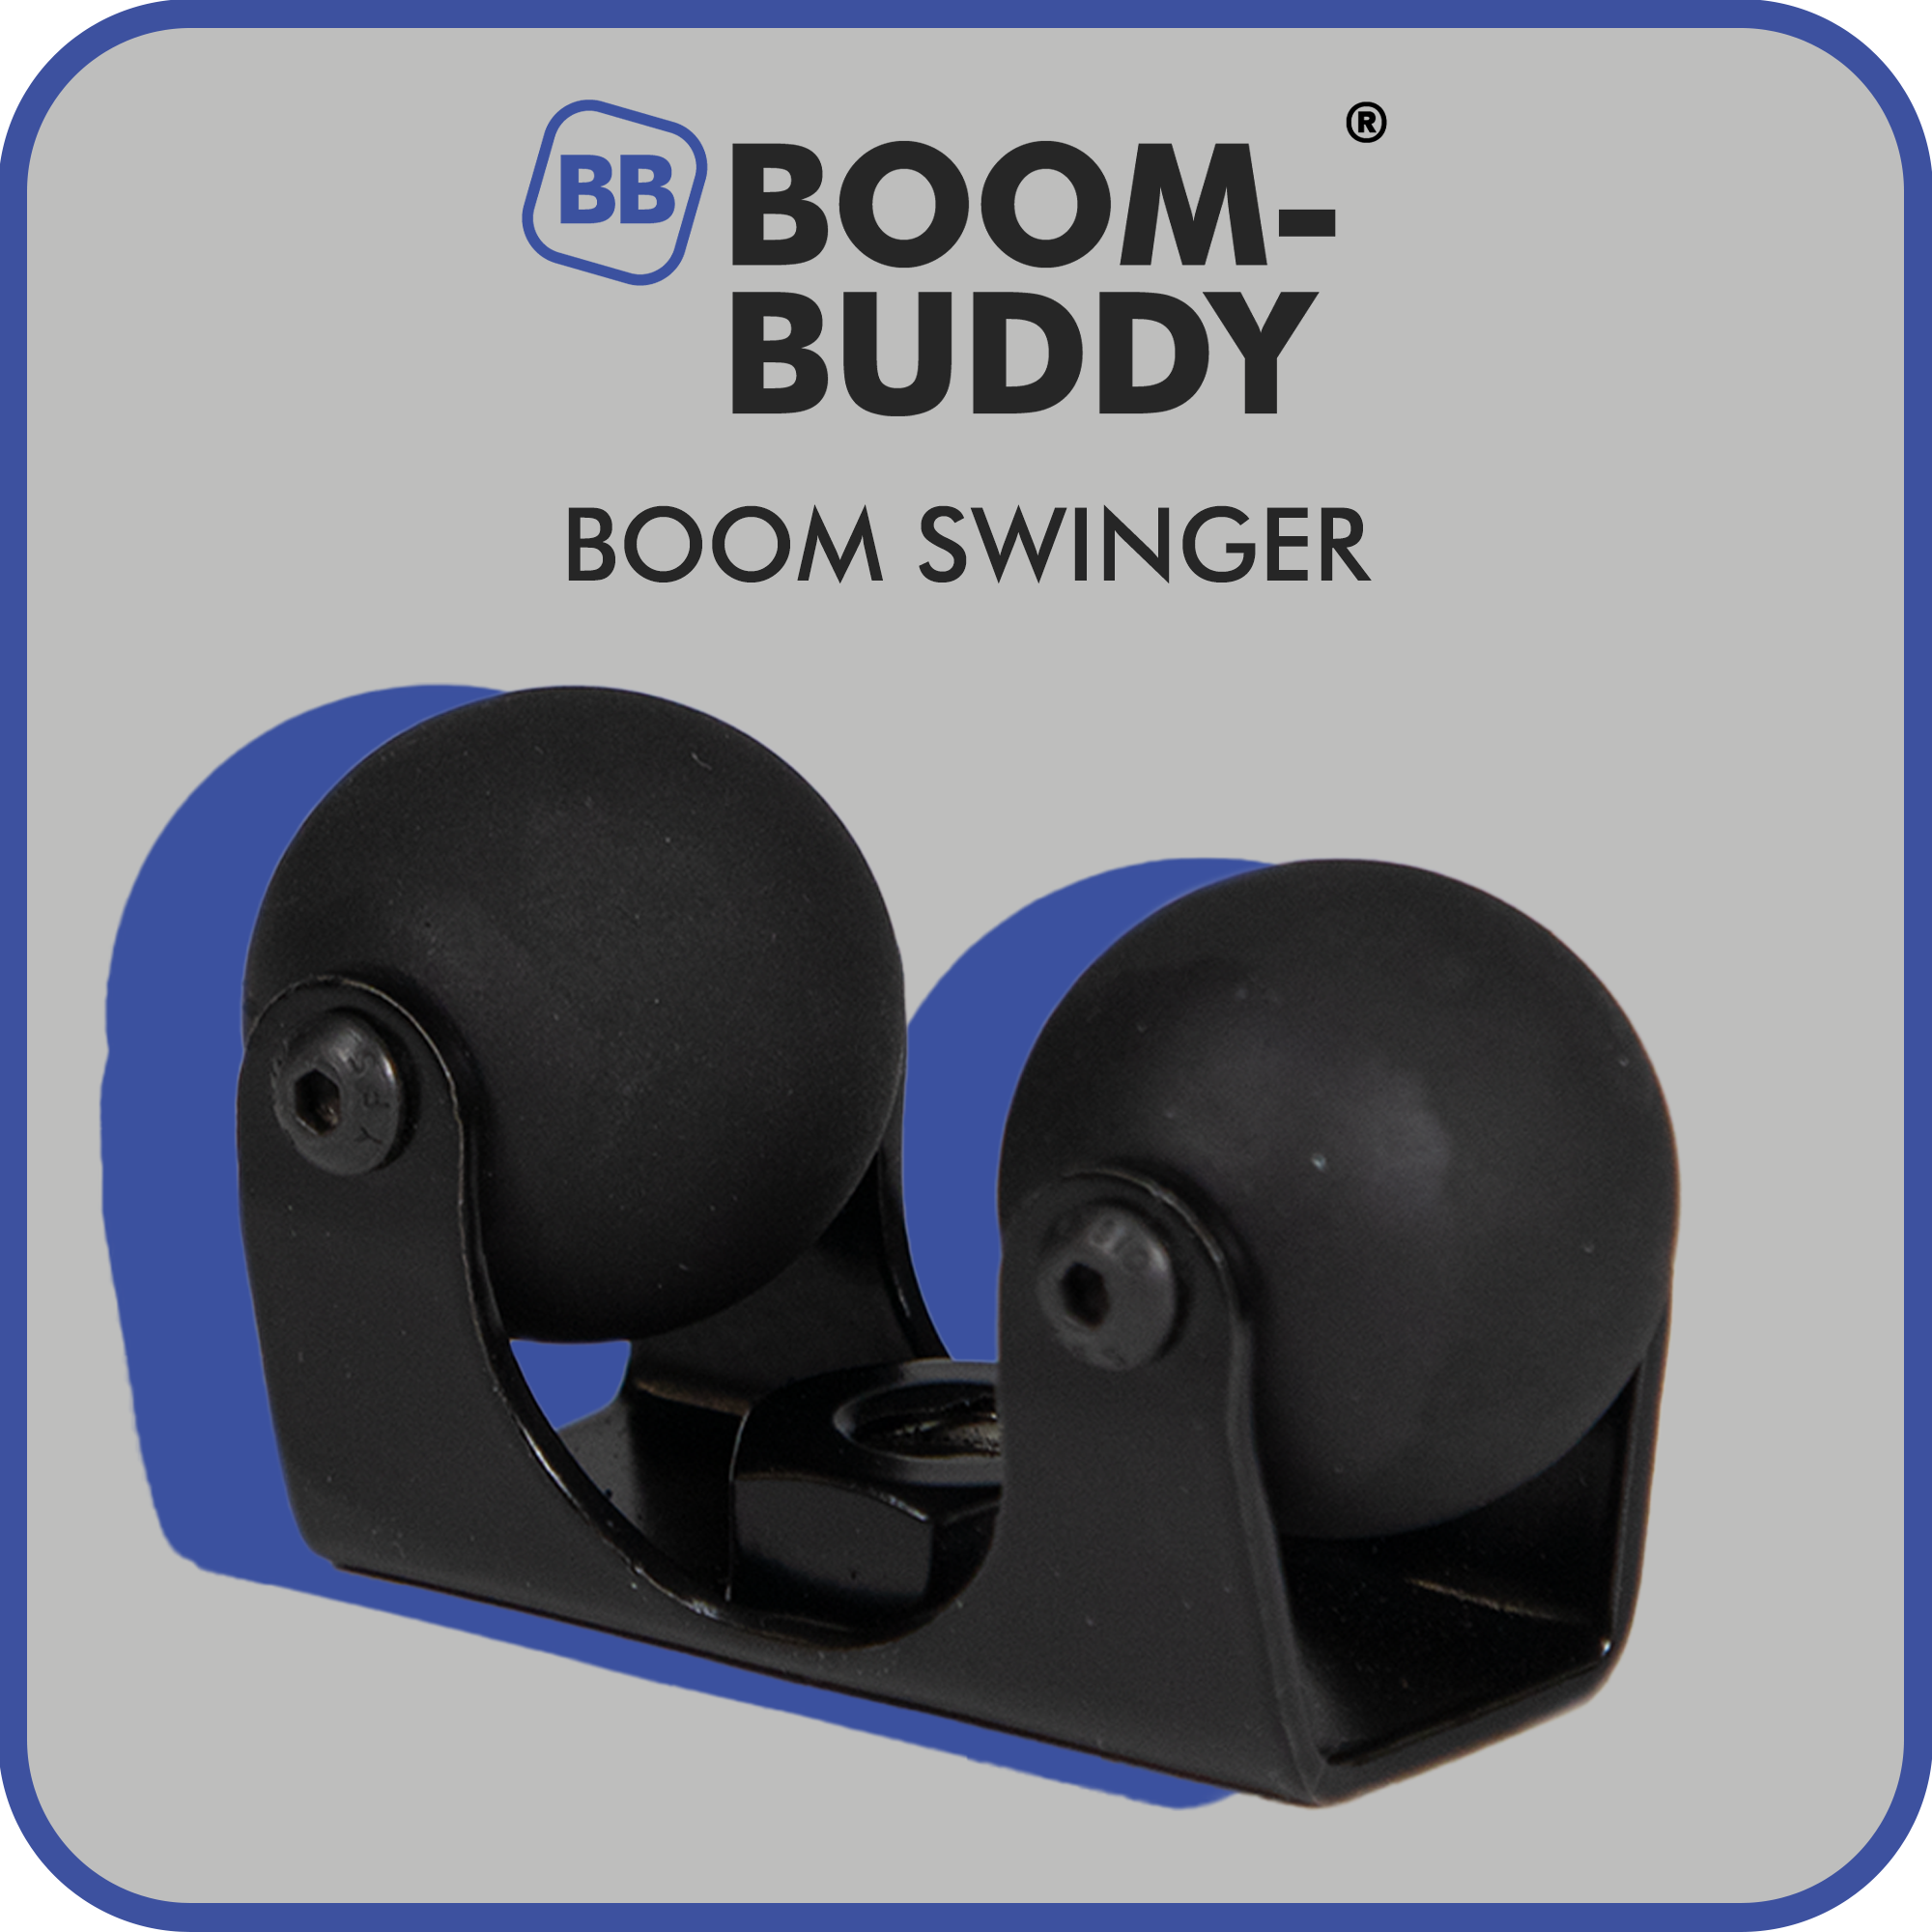 A photo of the Boom-Buddy Boom Swinger next to the Boom-Buddy logo and product title.